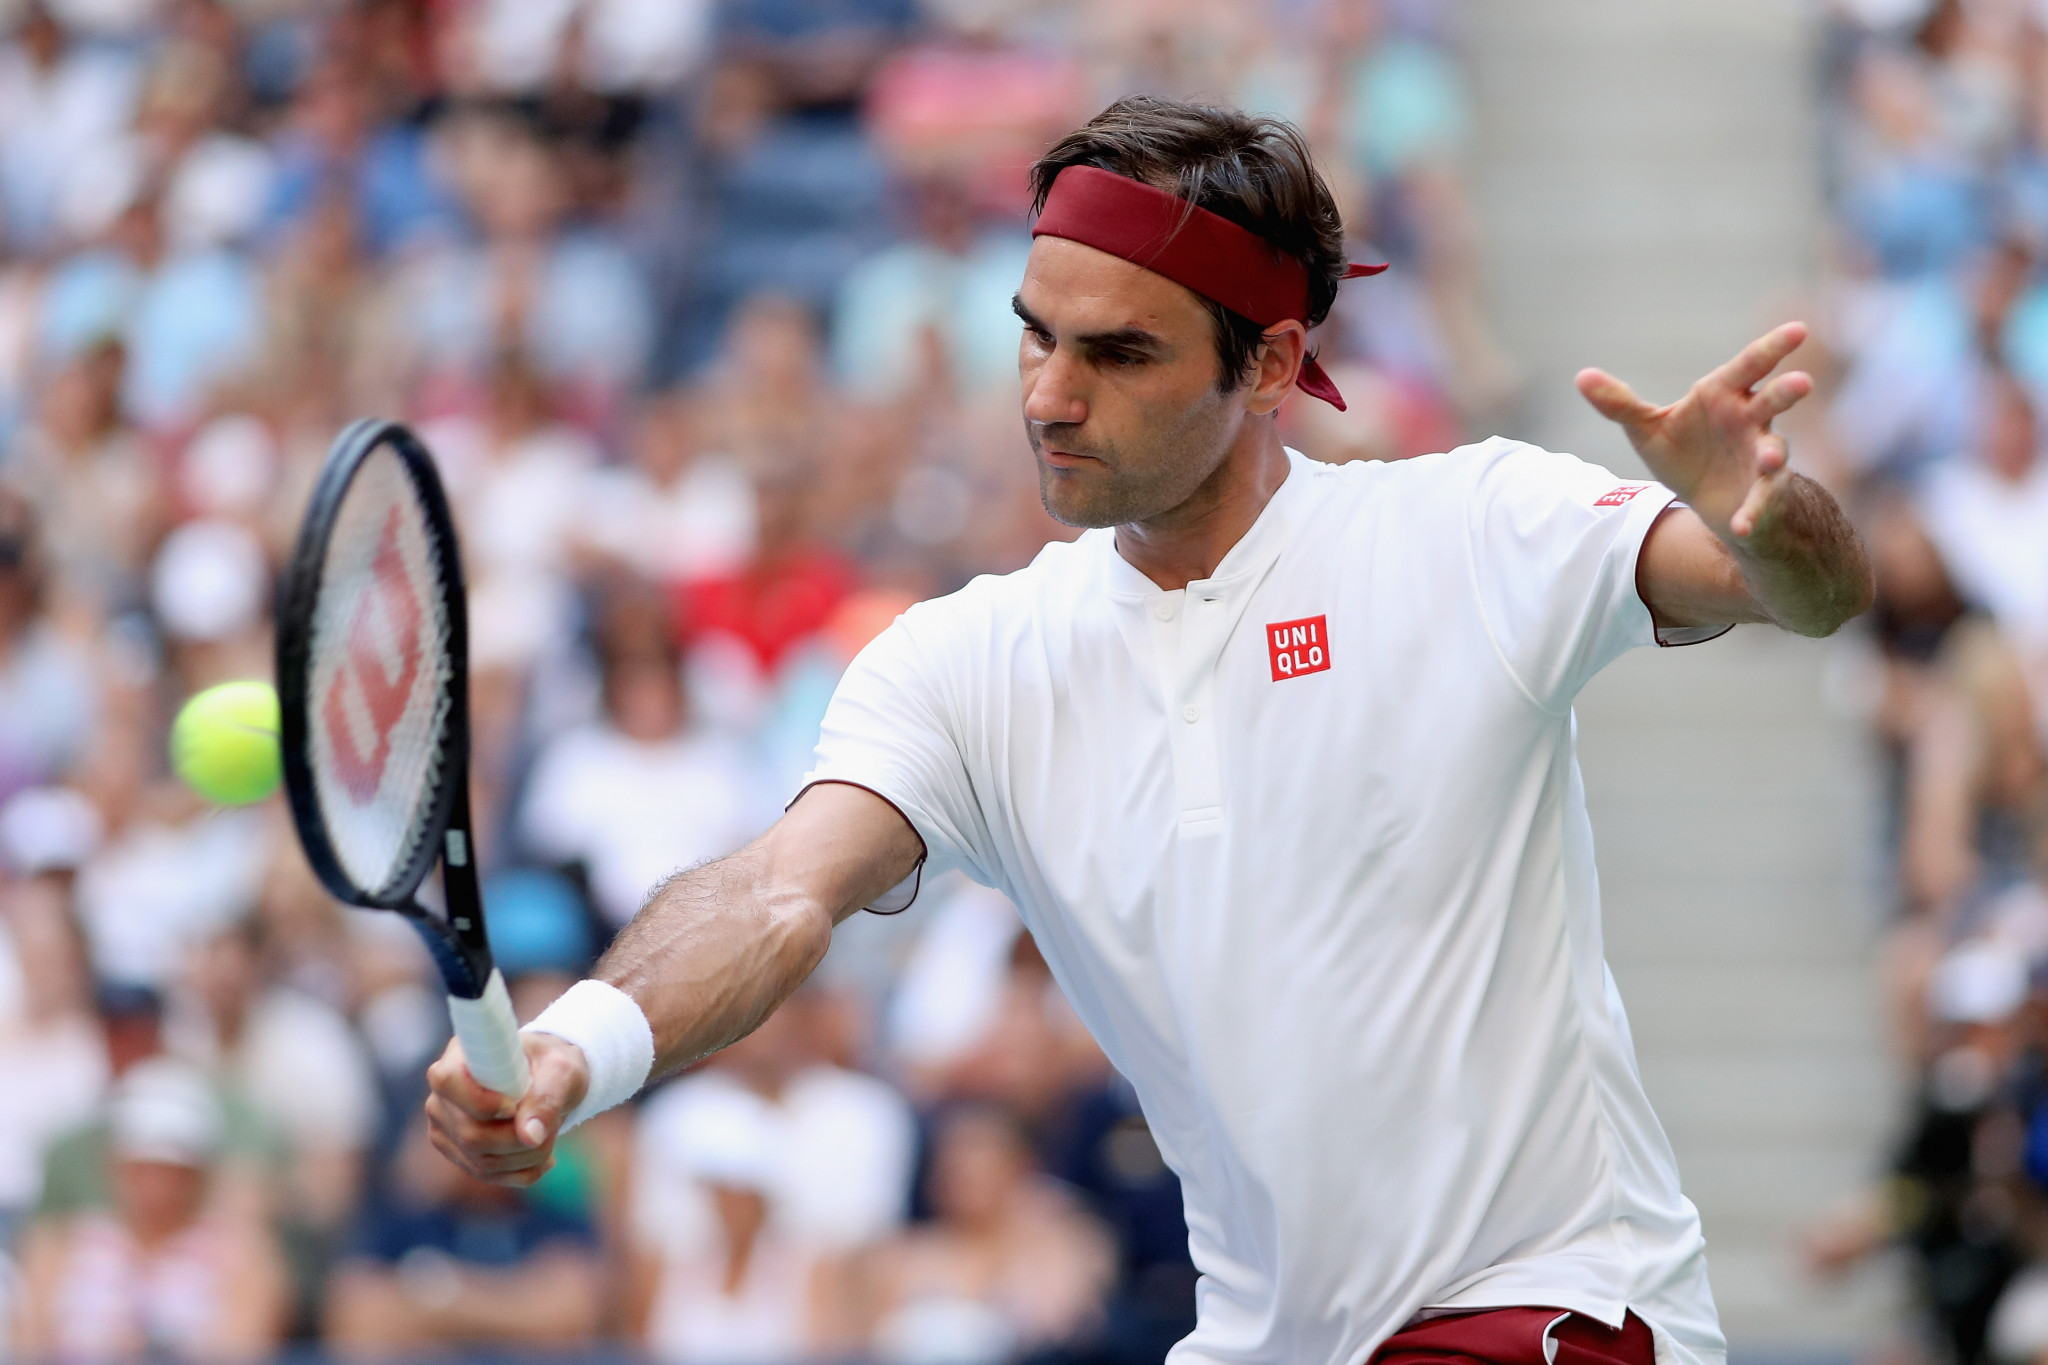 Roger Federer eased into the third round of the US Open in New York ©Getty Images